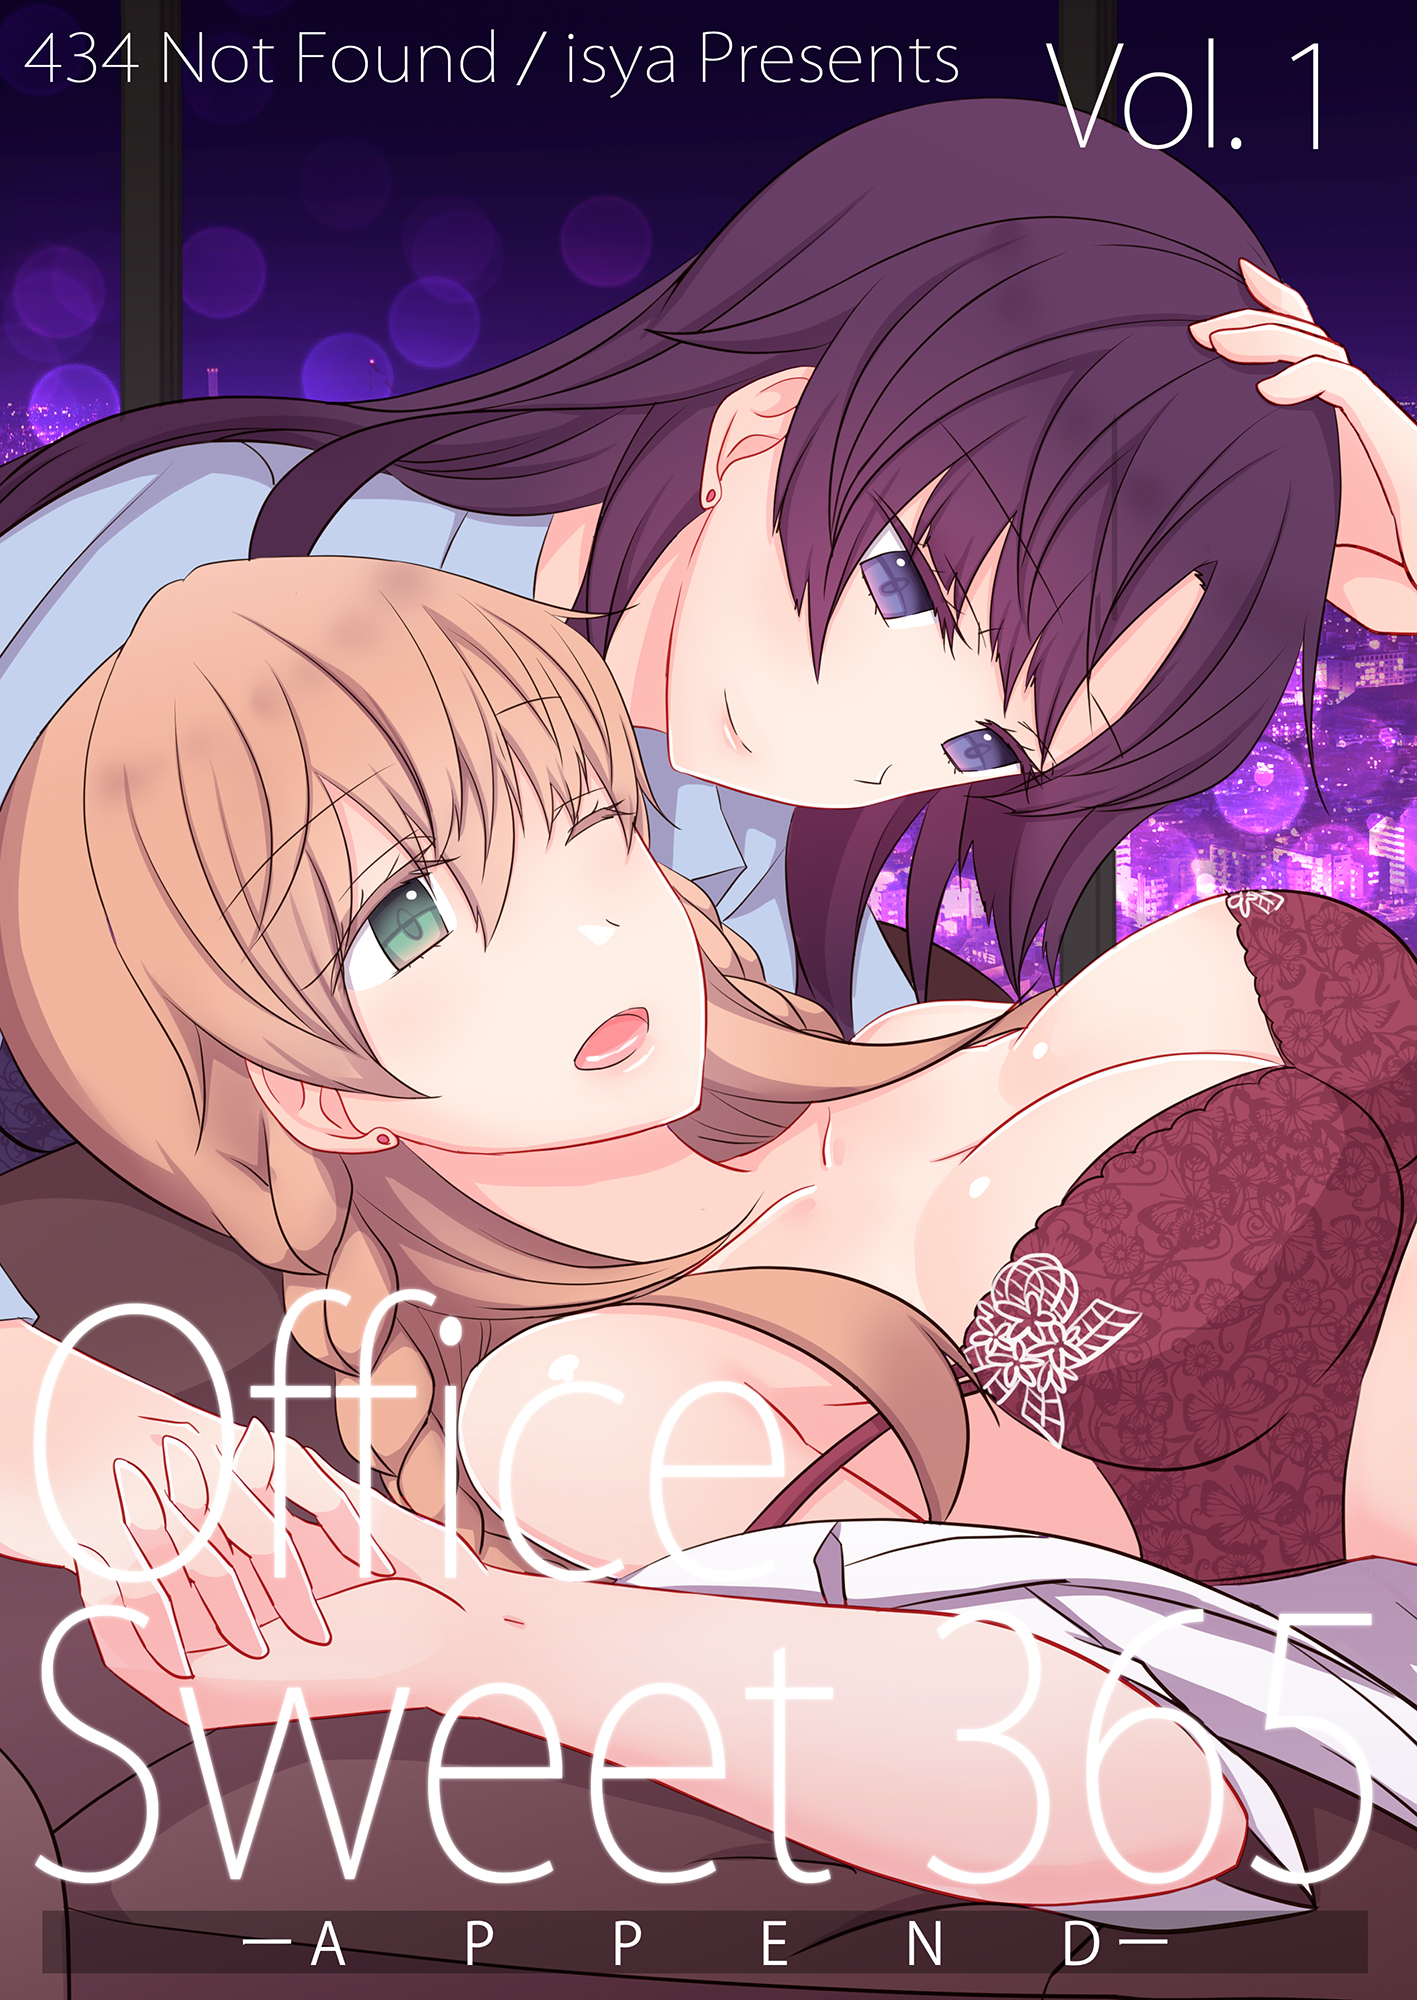 Office Sweet 365 Vol.1 APPEND